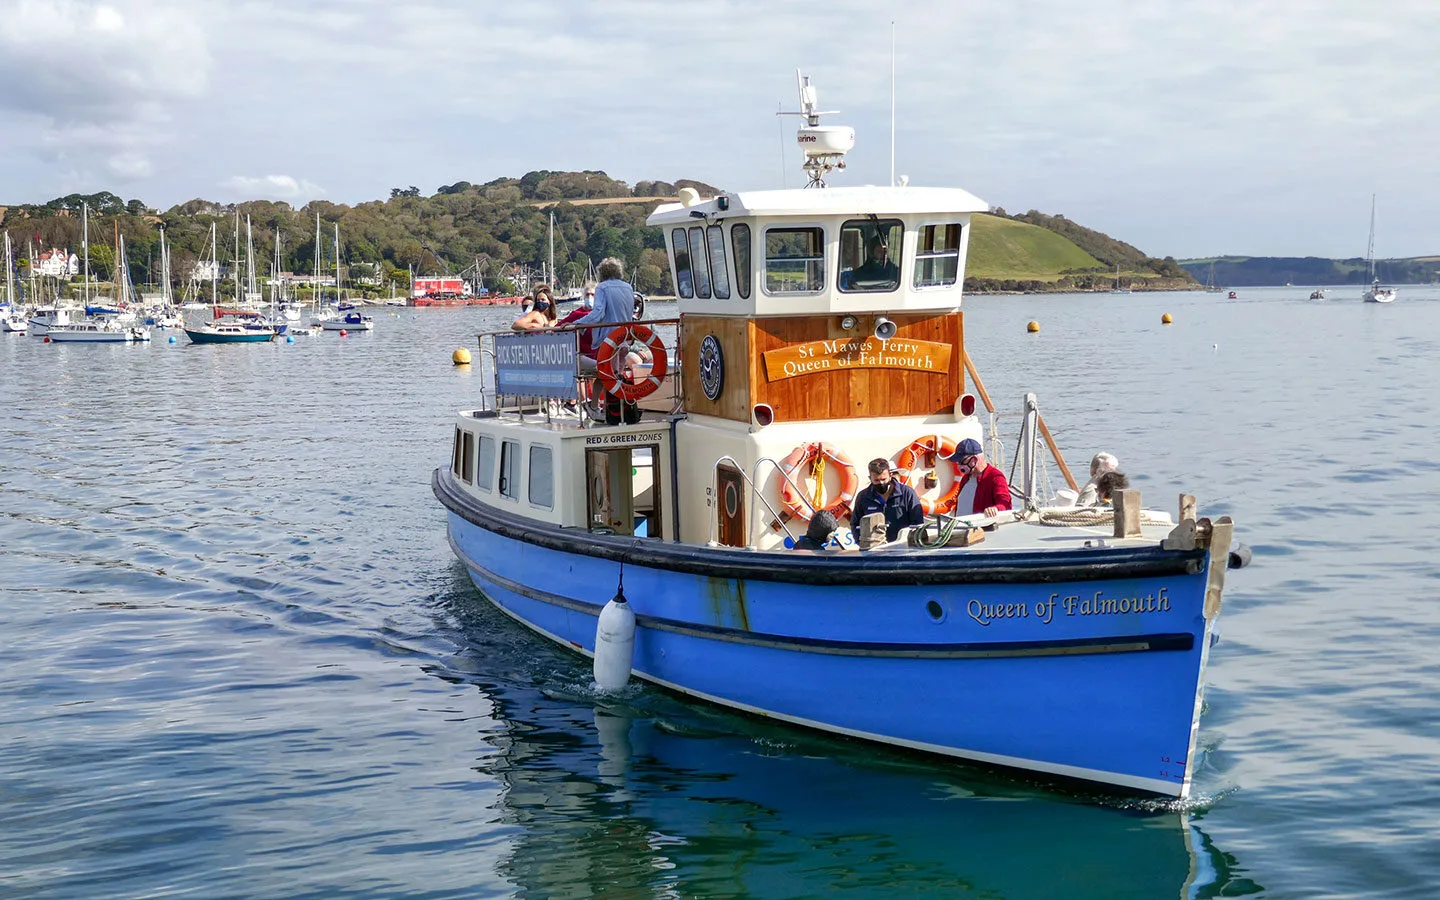 The Fal River Feerries boat to St Mawes